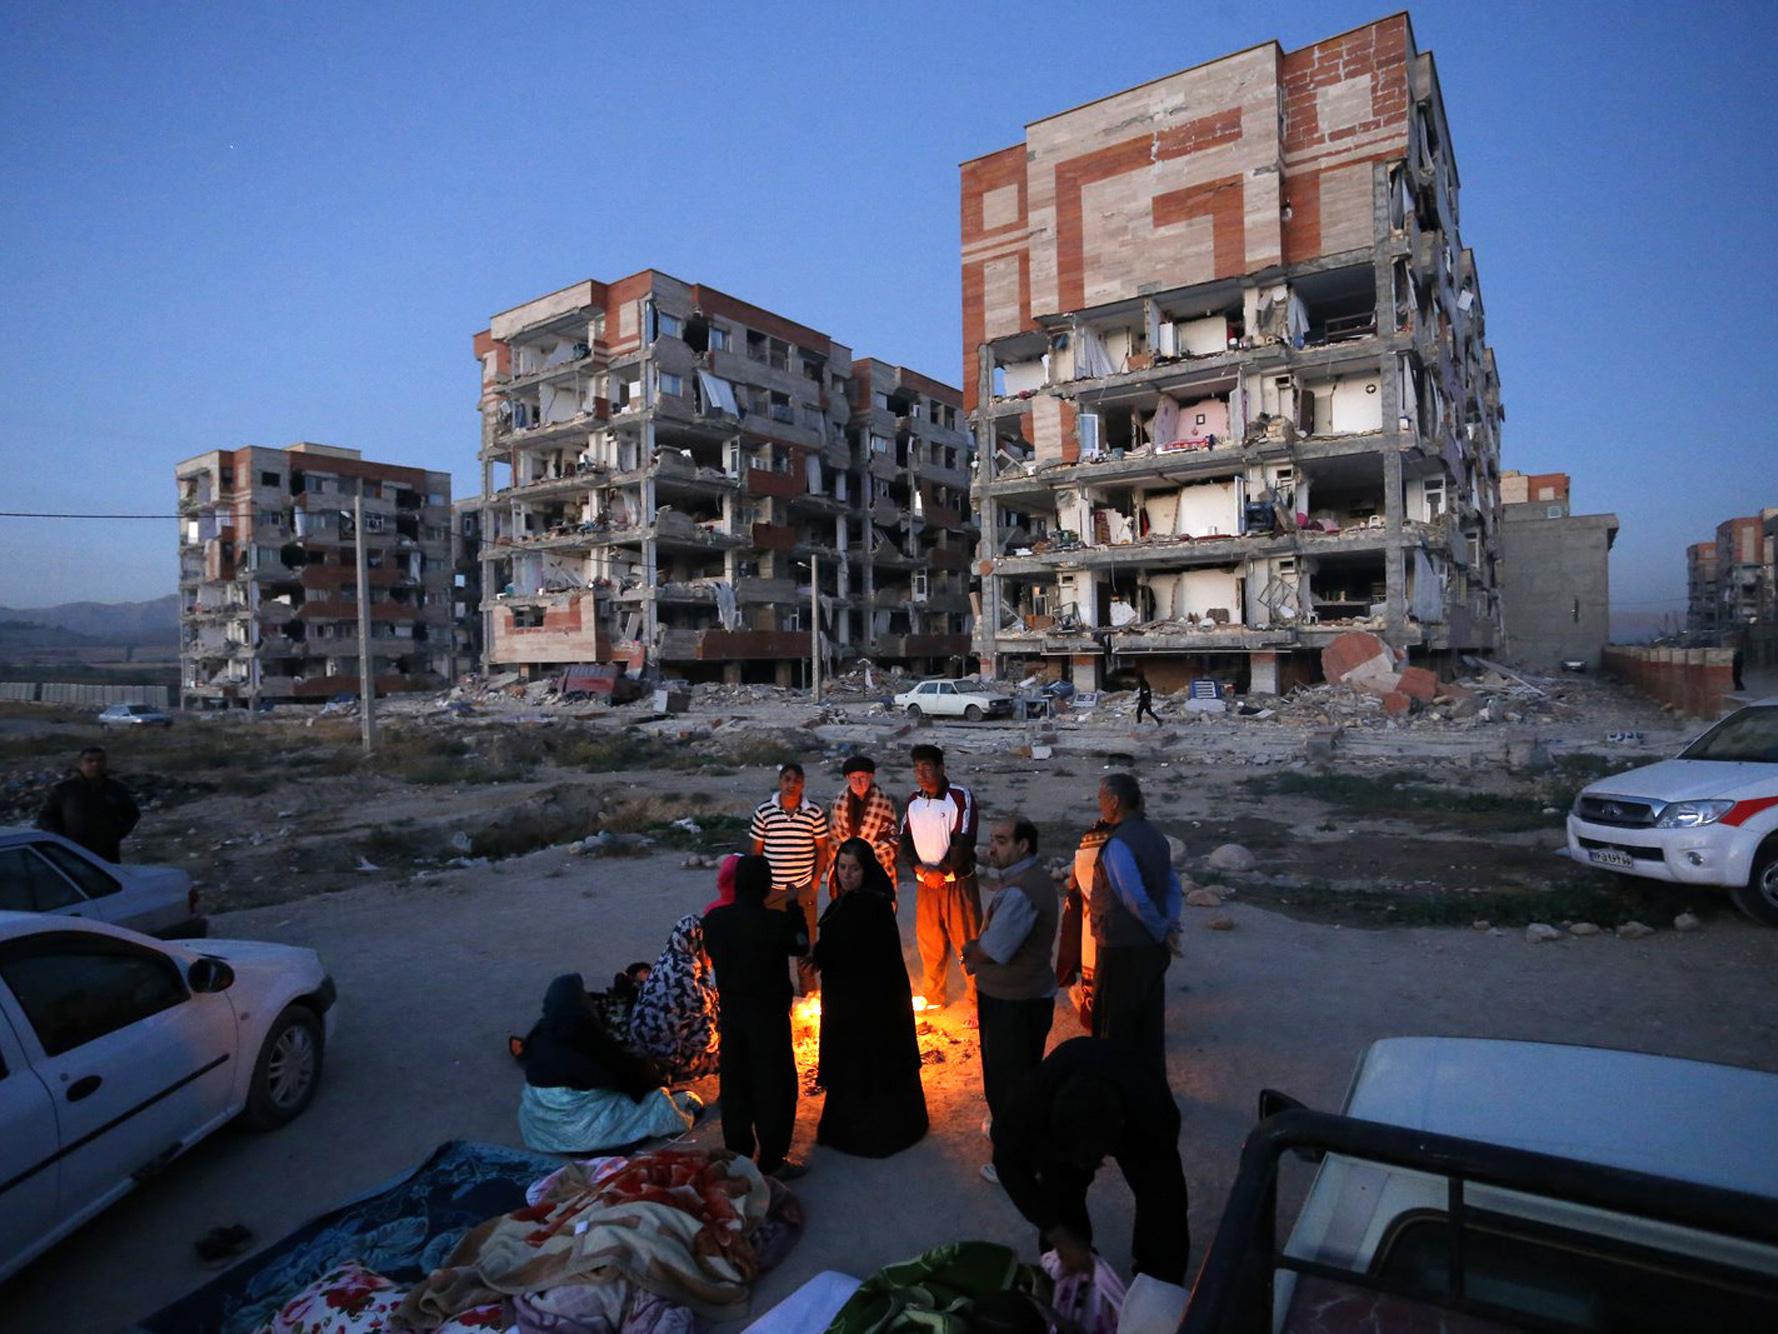 Survivors of the earthquake warm themselves in front of destroyed buildings at the city of Sarpol-e-Zahab in western Iran